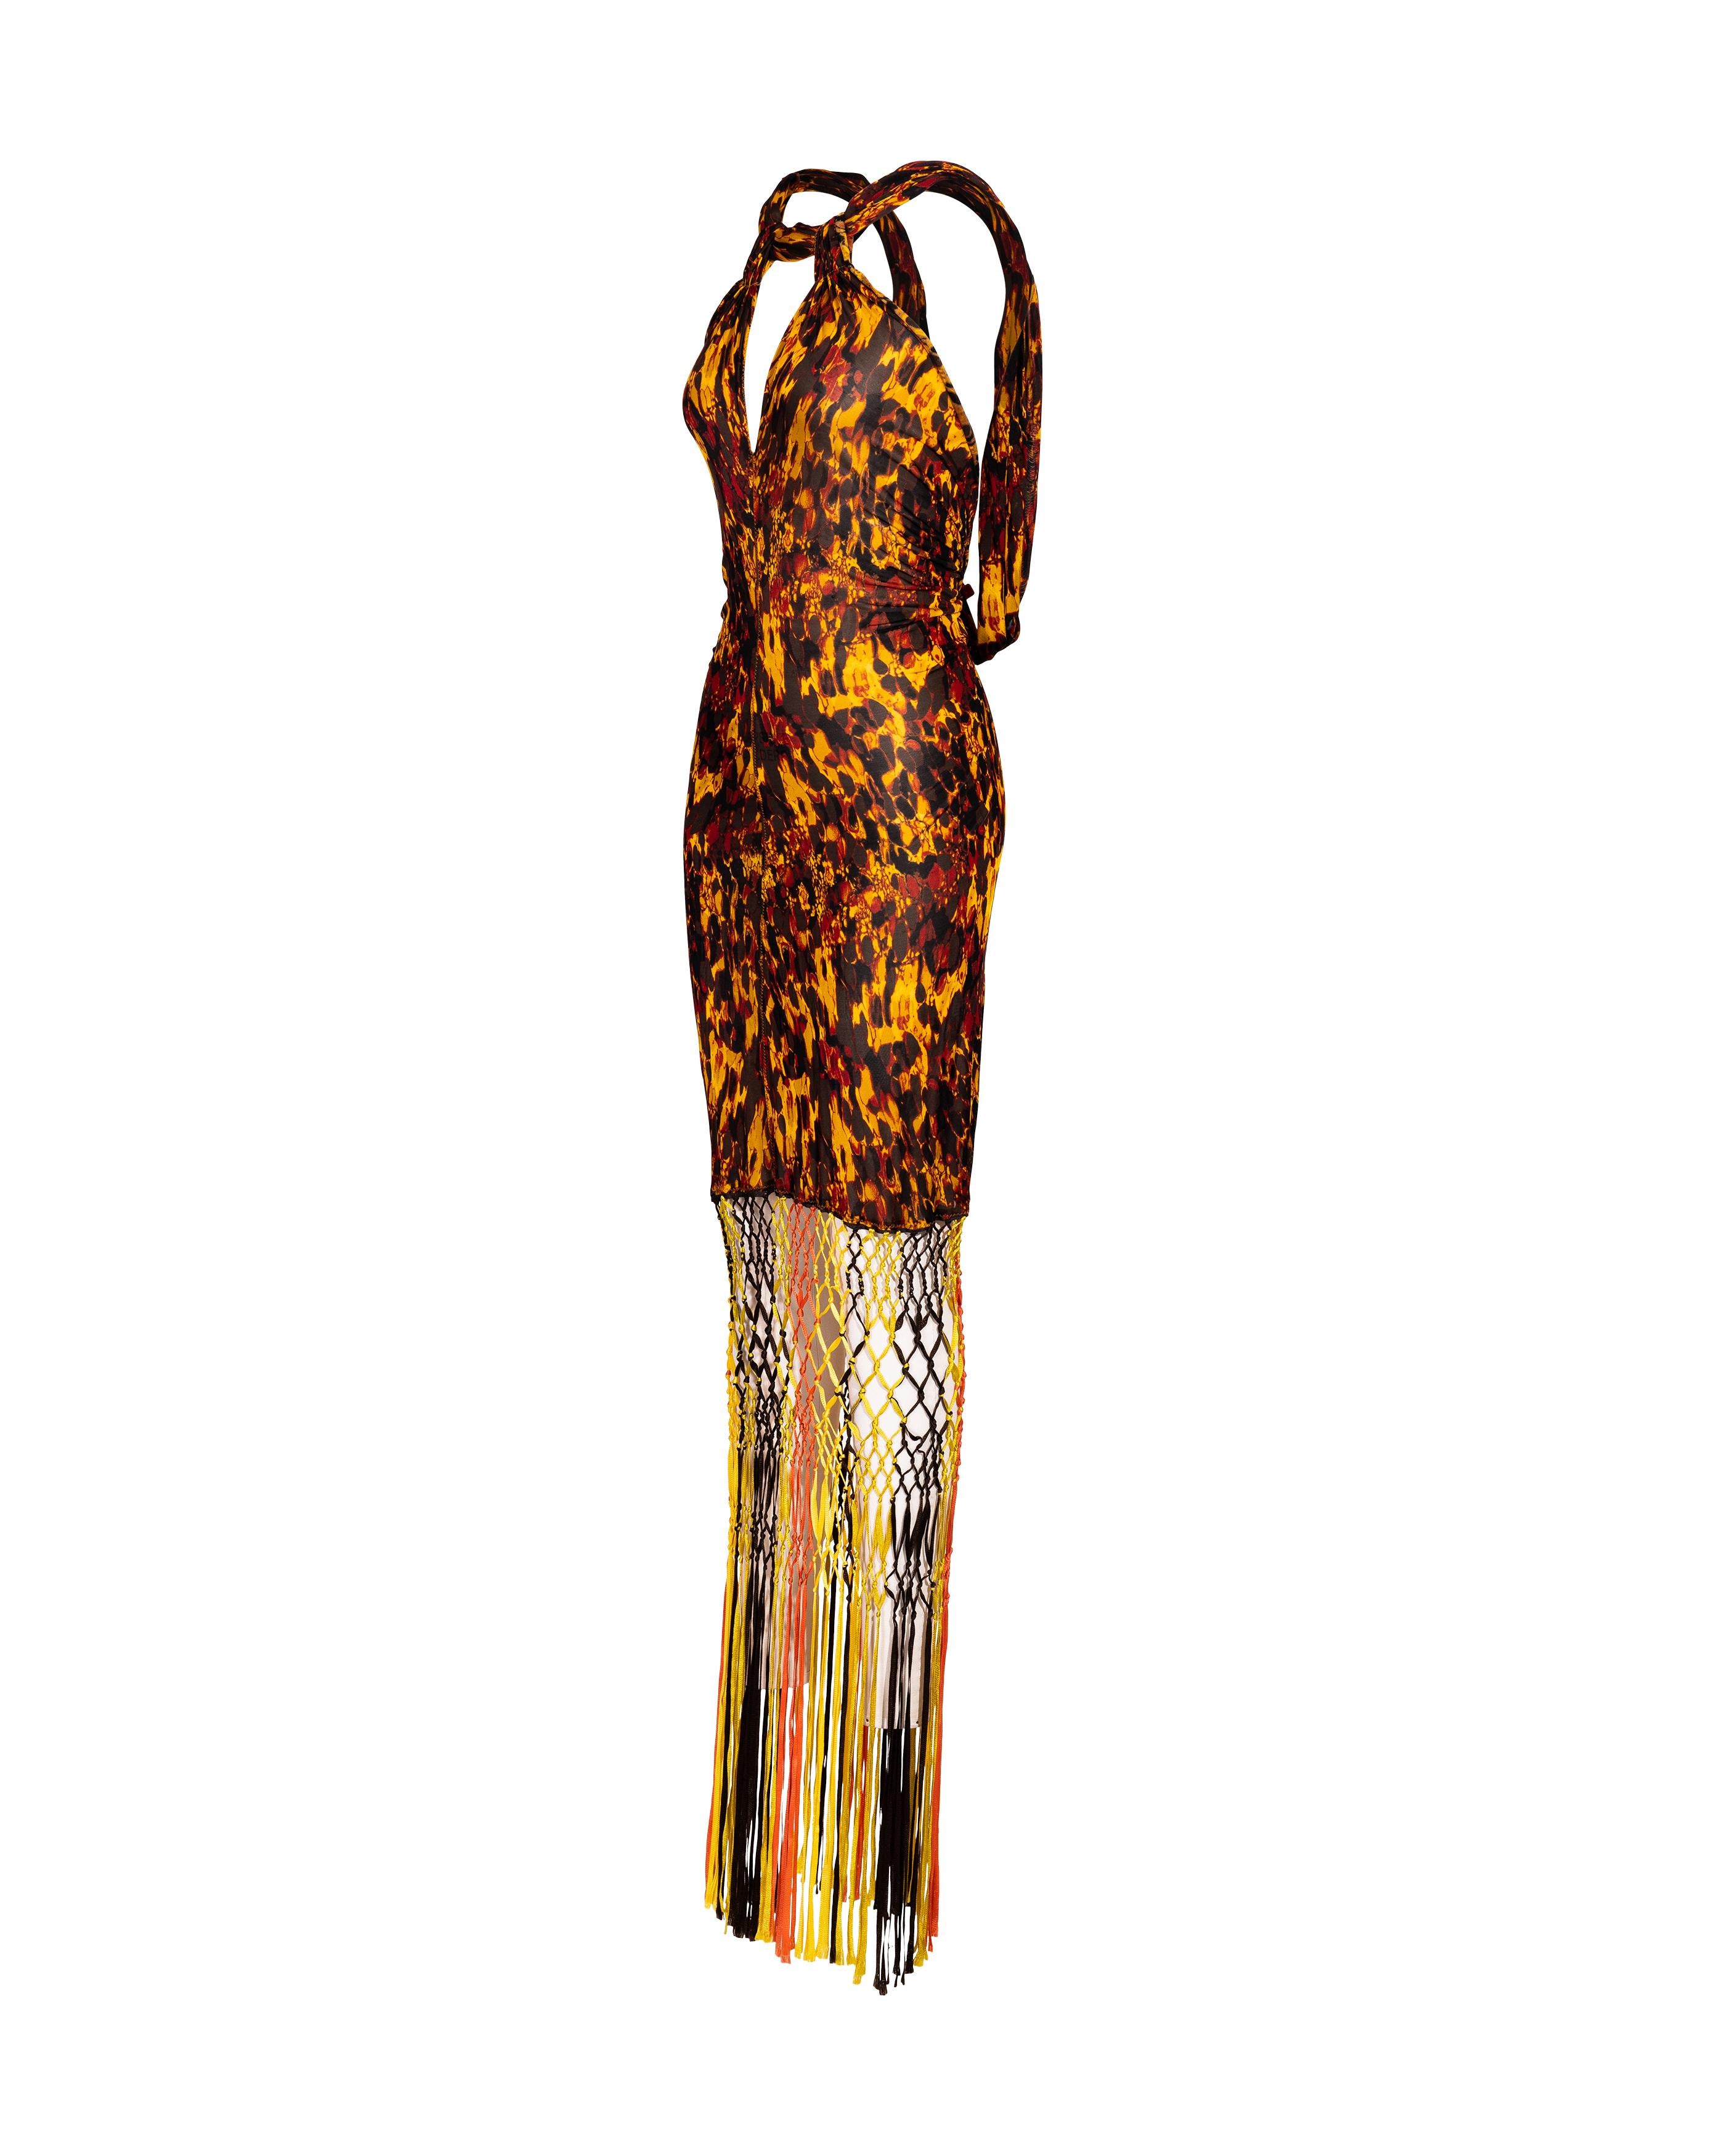 S/S 2005 Jean Paul Gaultier Tortoiseshell Print Macrame Fringe Gown In Excellent Condition For Sale In North Hollywood, CA